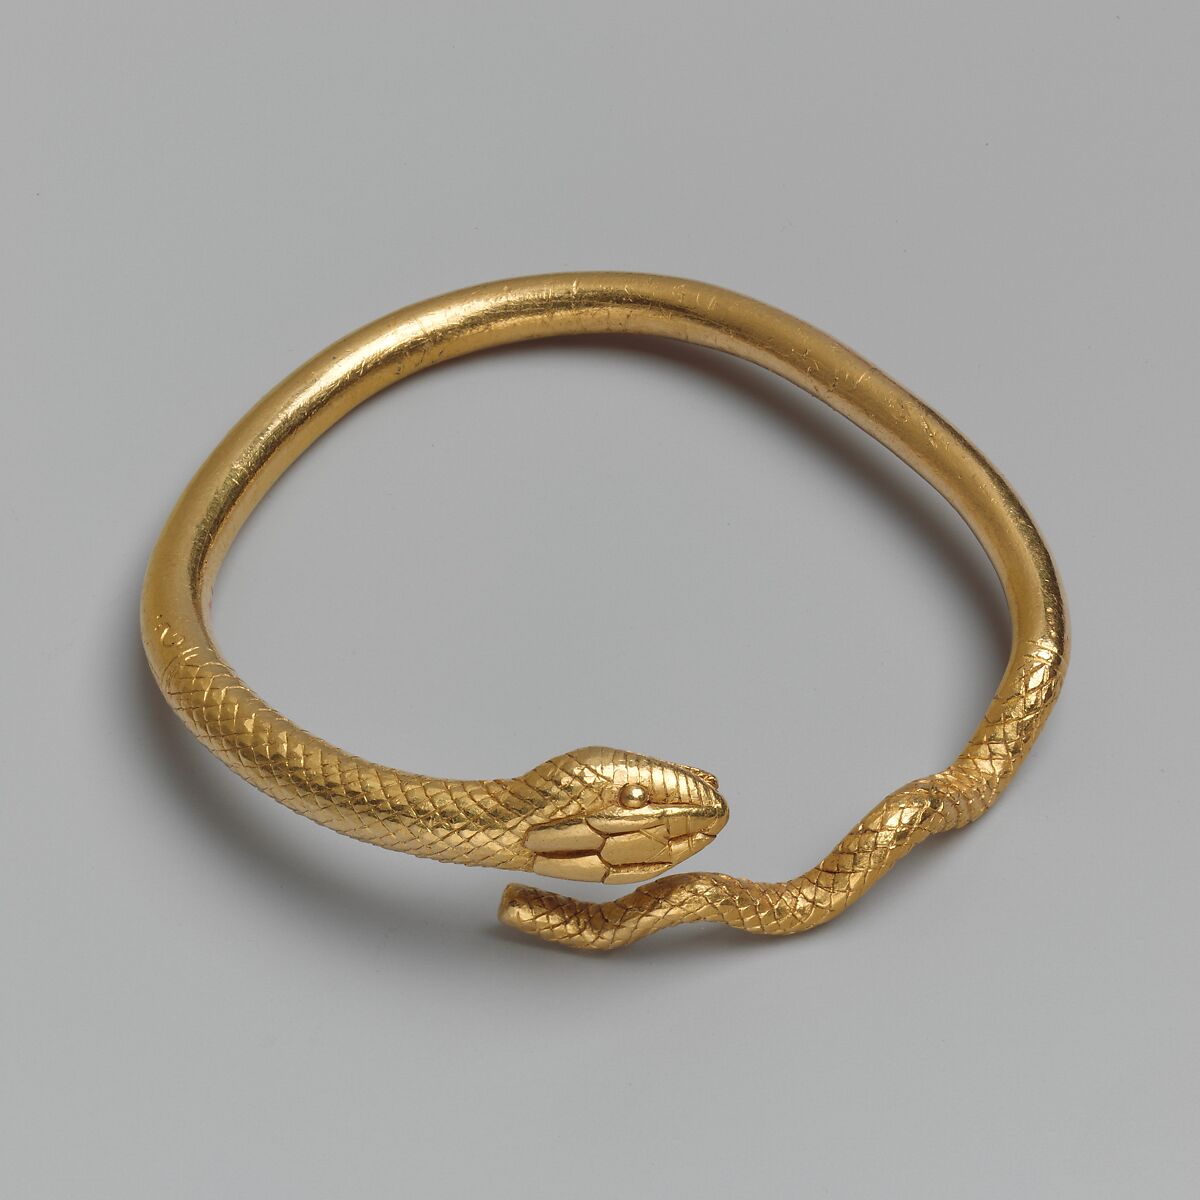 Gold bracelet in the form of a snake, Gold, Greek, Ptolemaic 